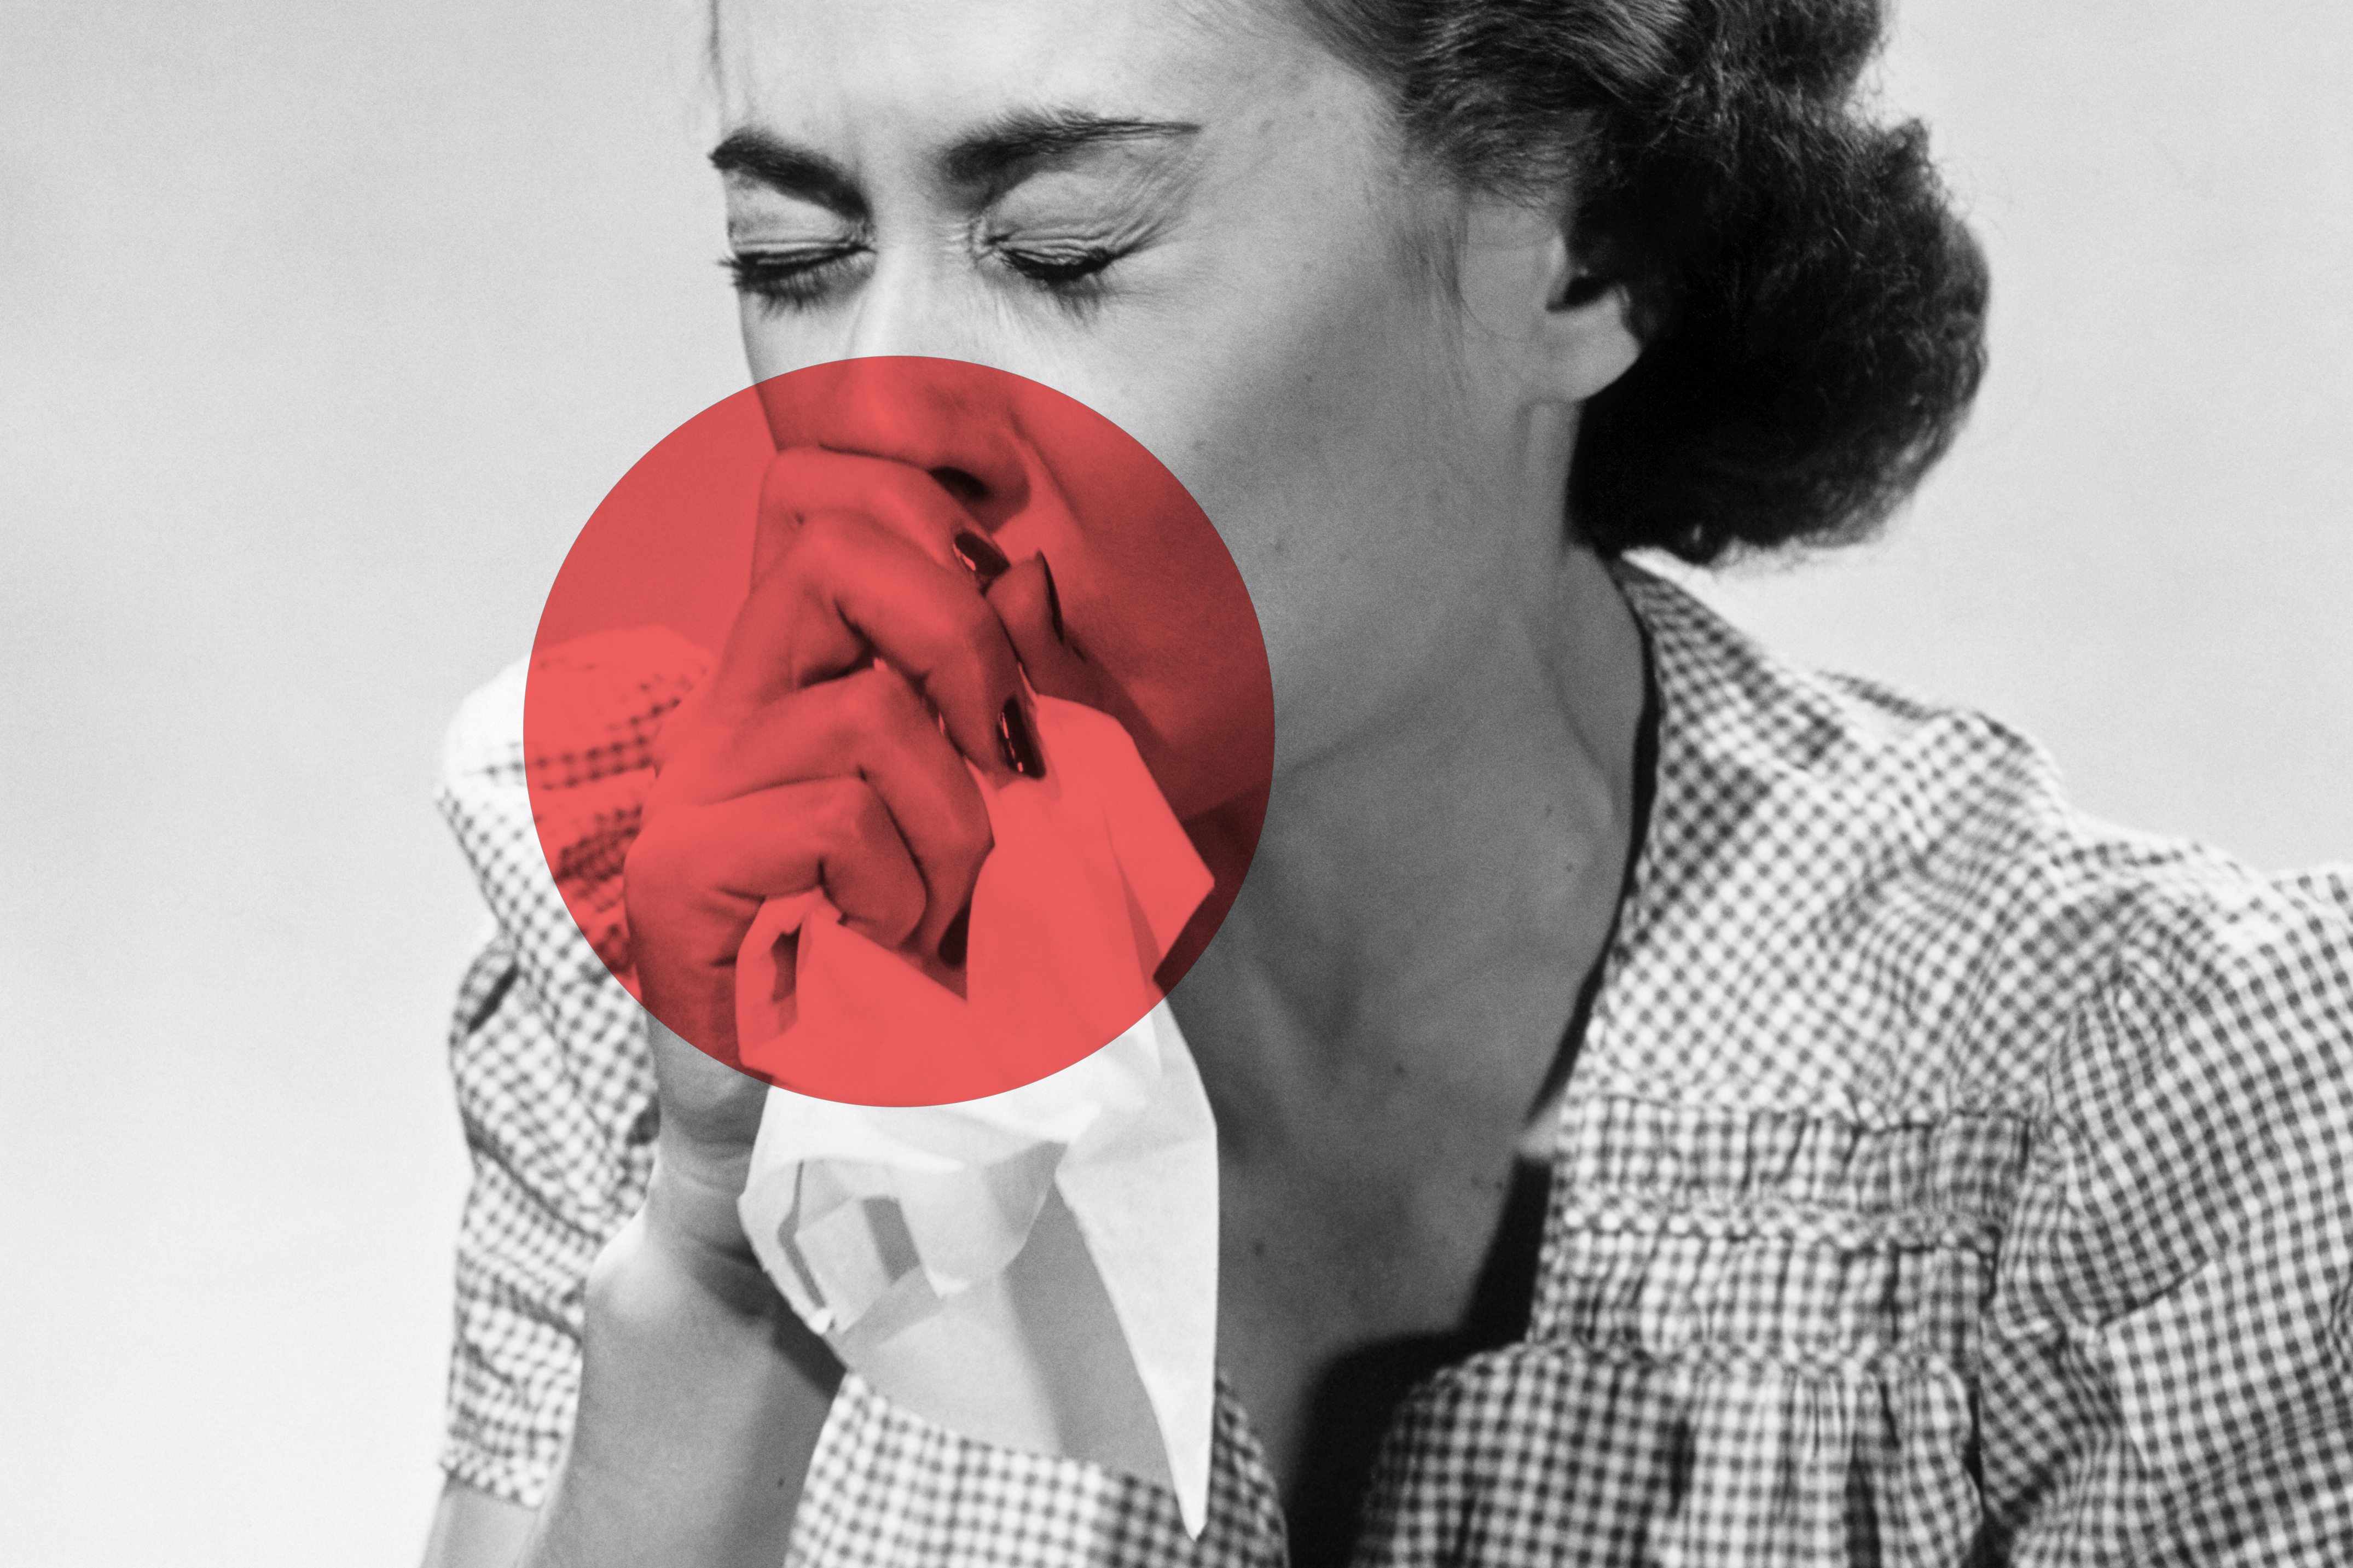 A photo illustration shows a woman from the 1950s sneezing into a handkerchief covering her nose and mouth, with a red circle expanding from the sneeze.